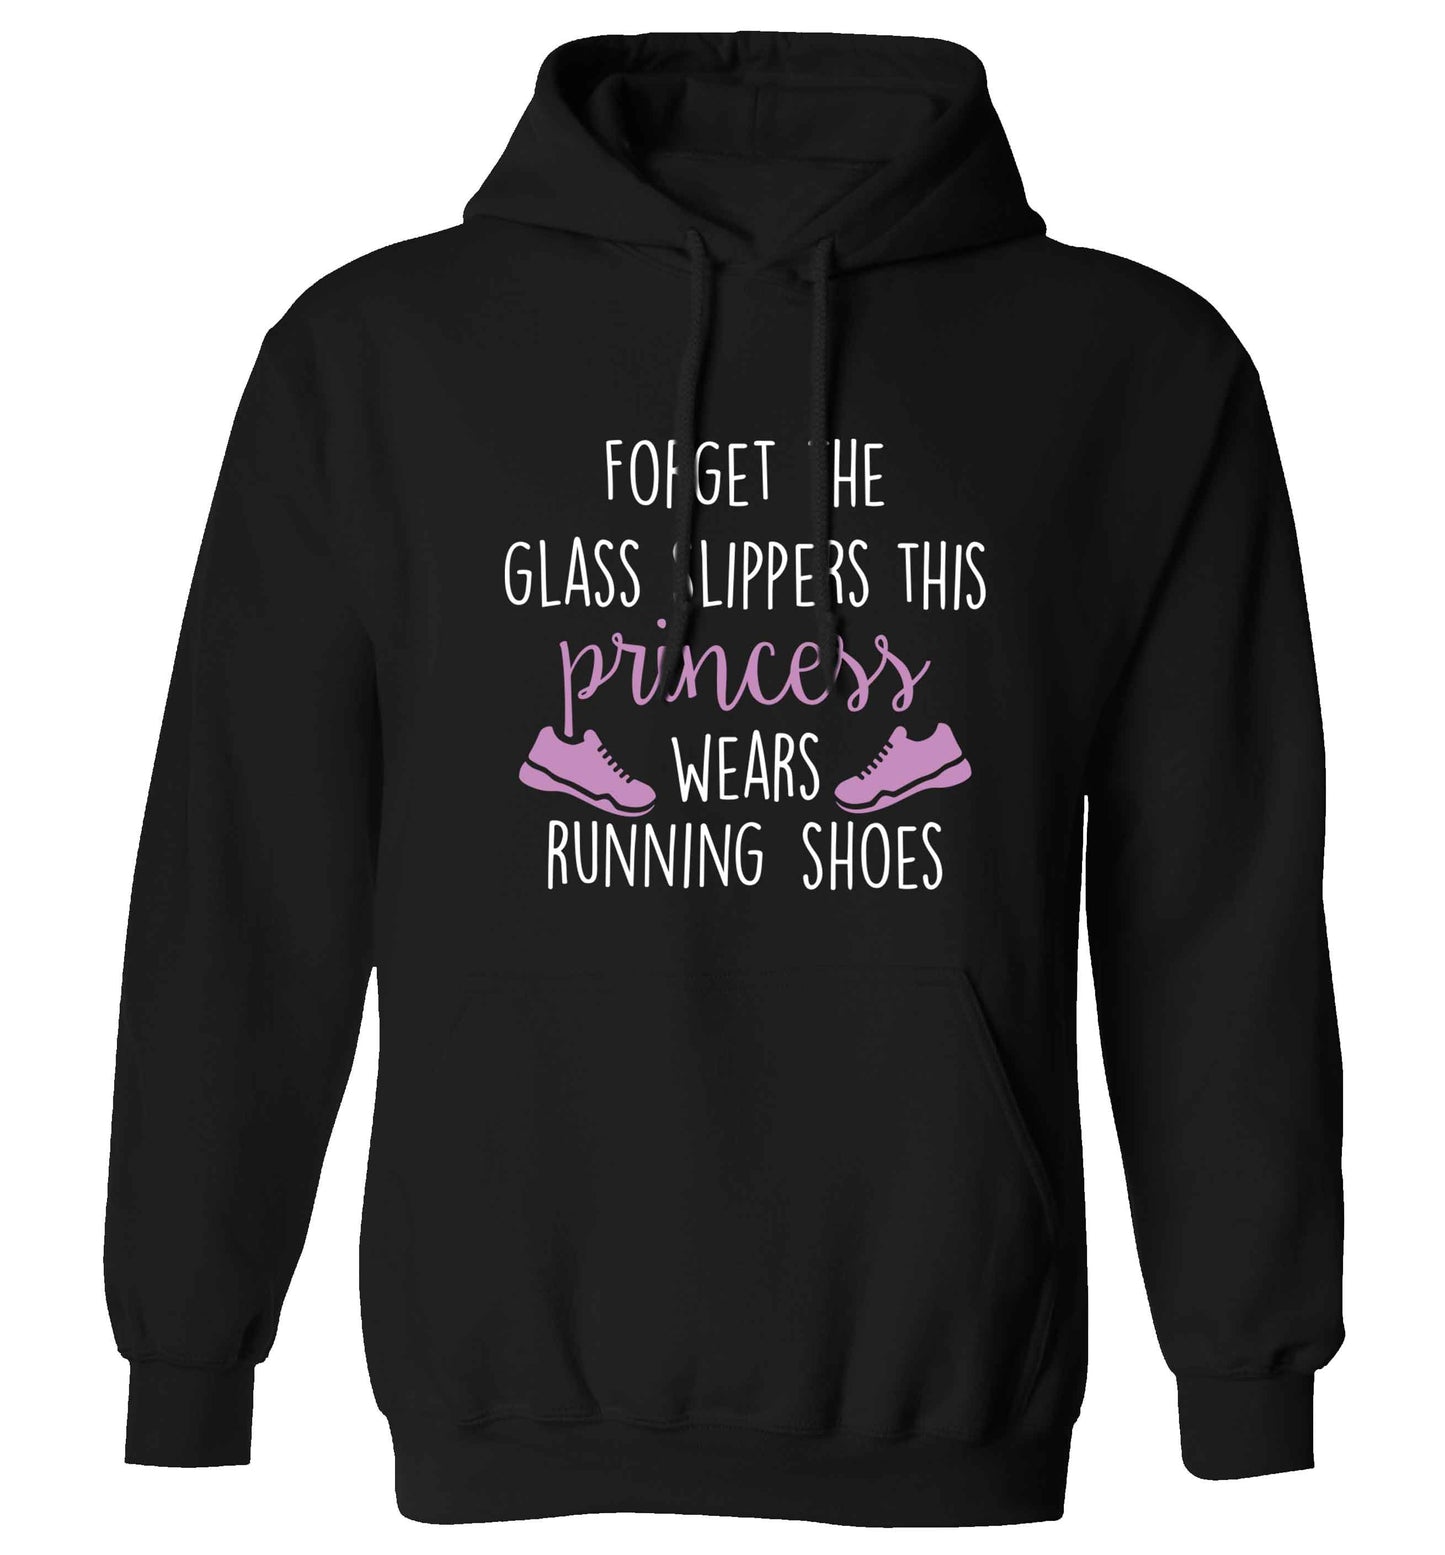 Forget the glass slippers this princess wears running shoes adults unisex black hoodie 2XL